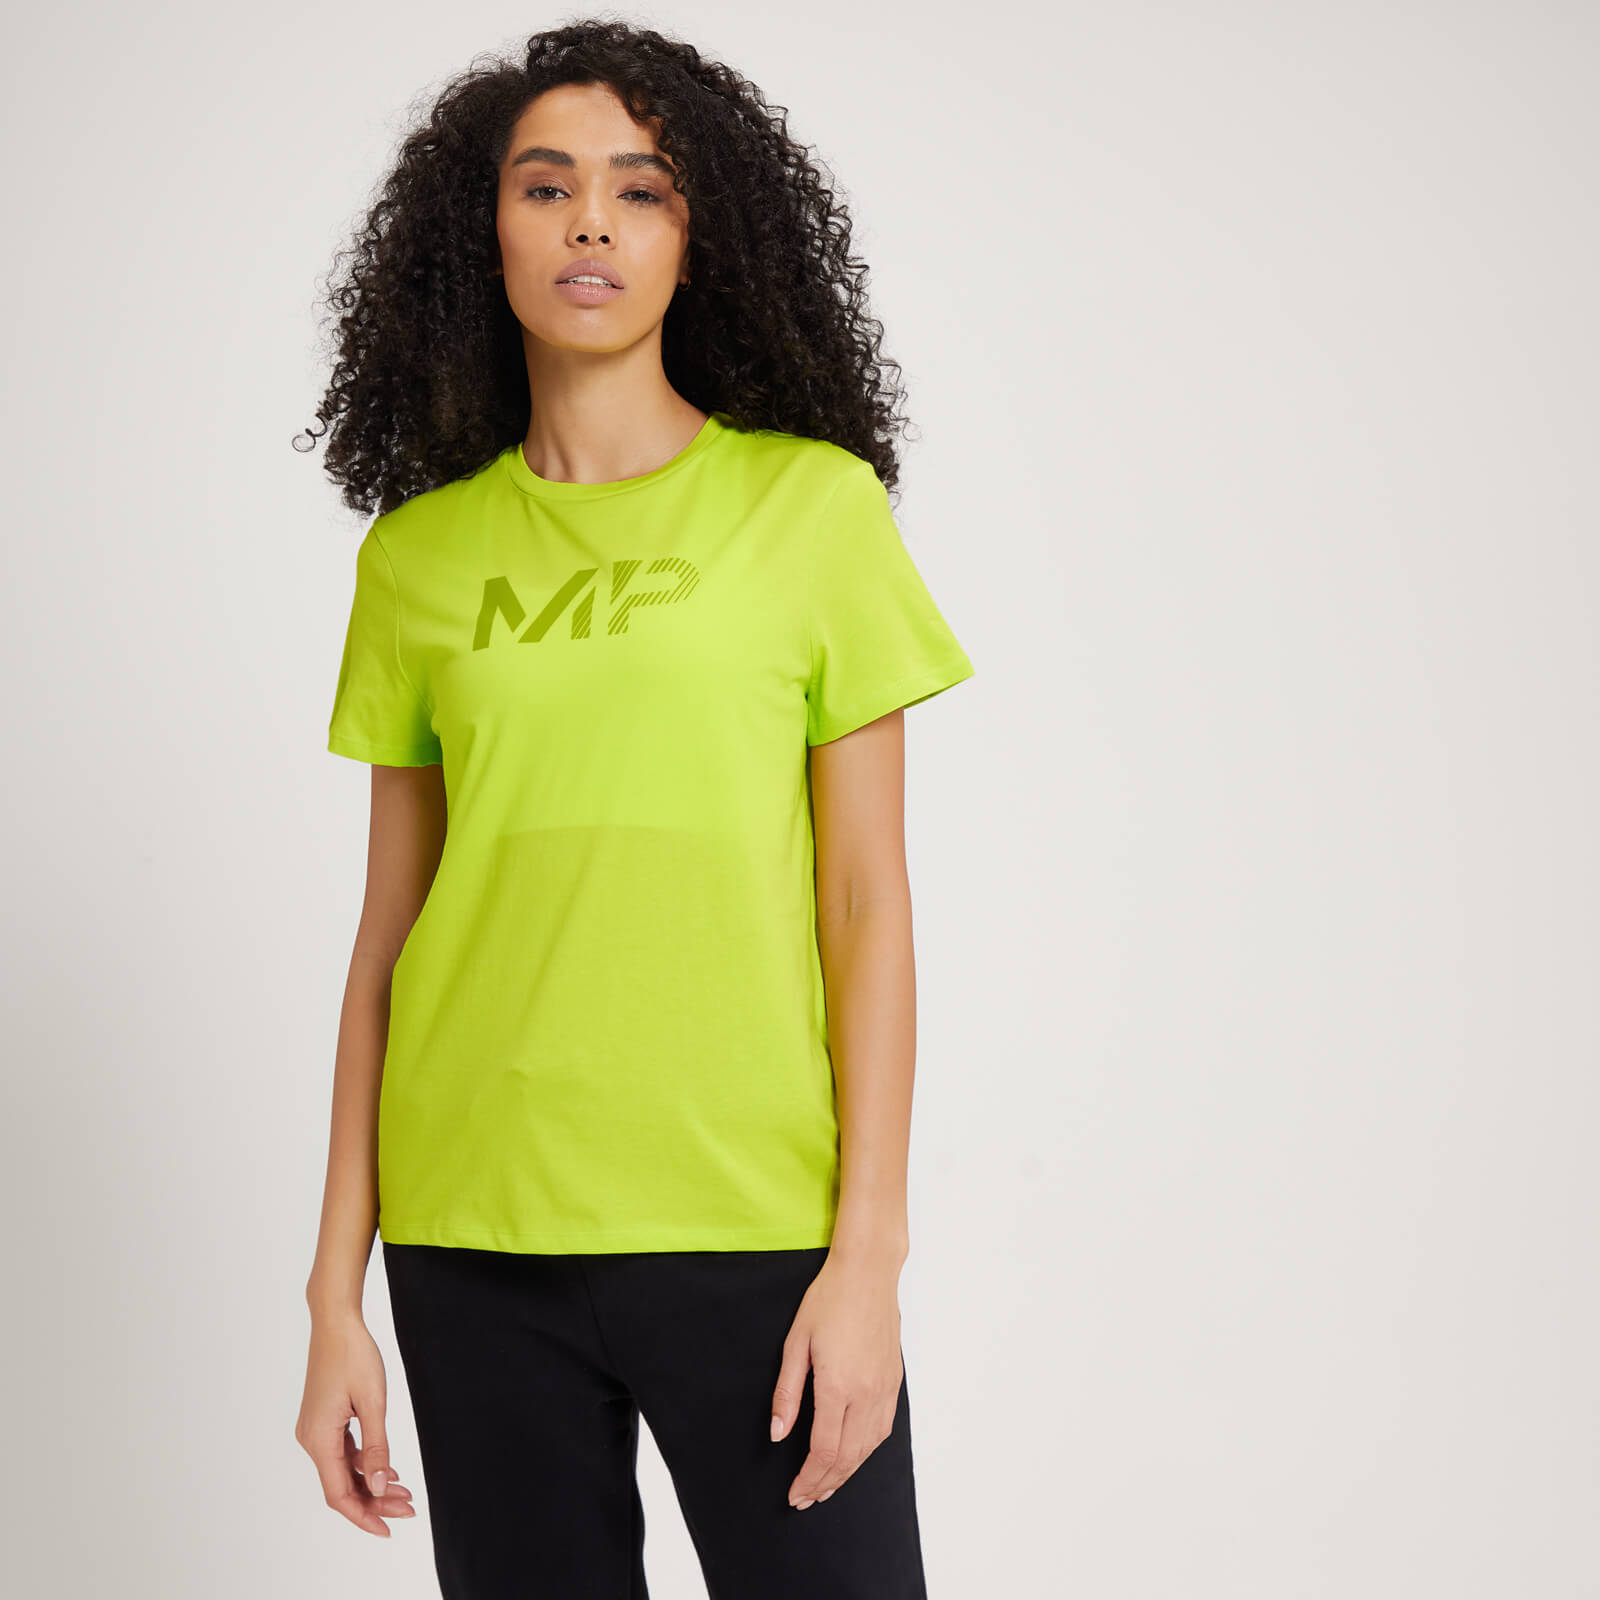 Myprotein UK MP Women's Fade Graphic T-Shirt - Lime